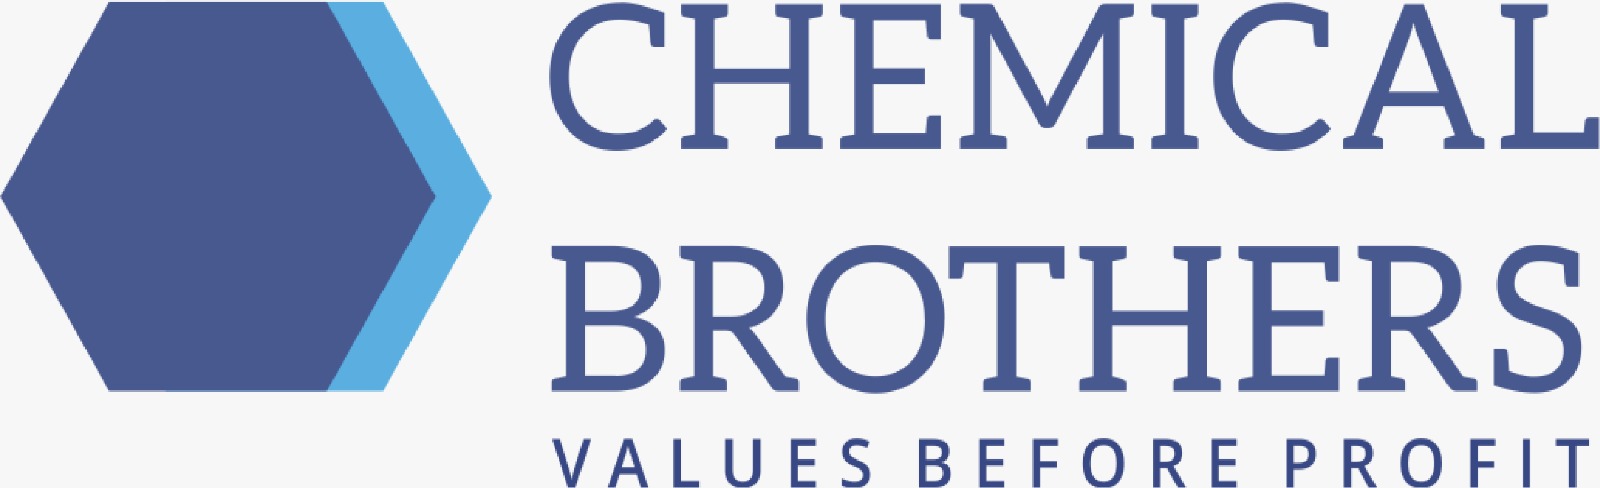 Nano Tech Chemical Brothers Private Limited